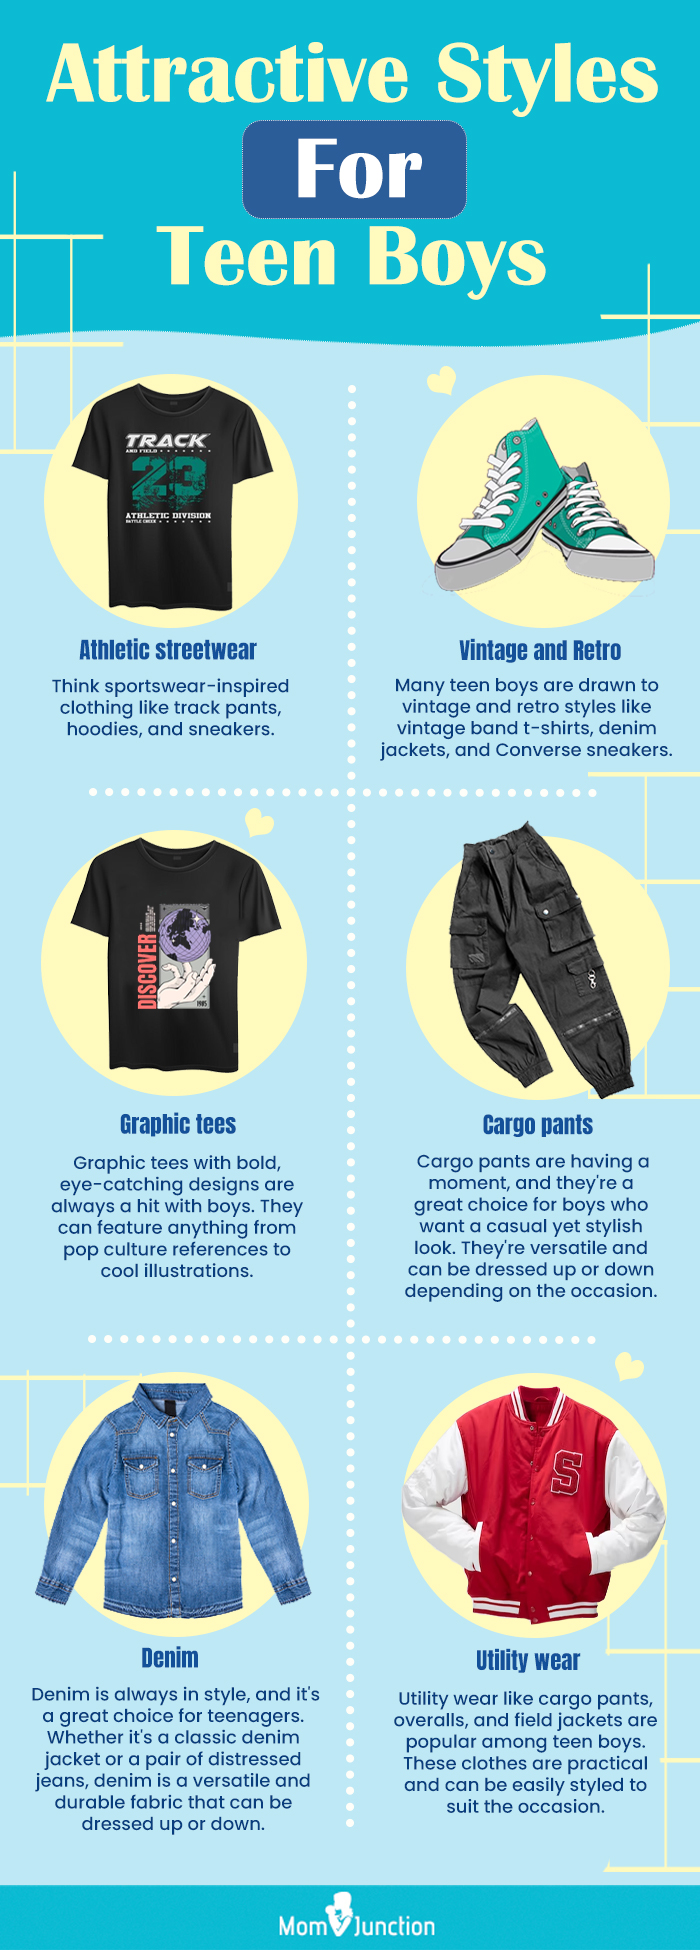 attractive styles for teen boys (infographic)